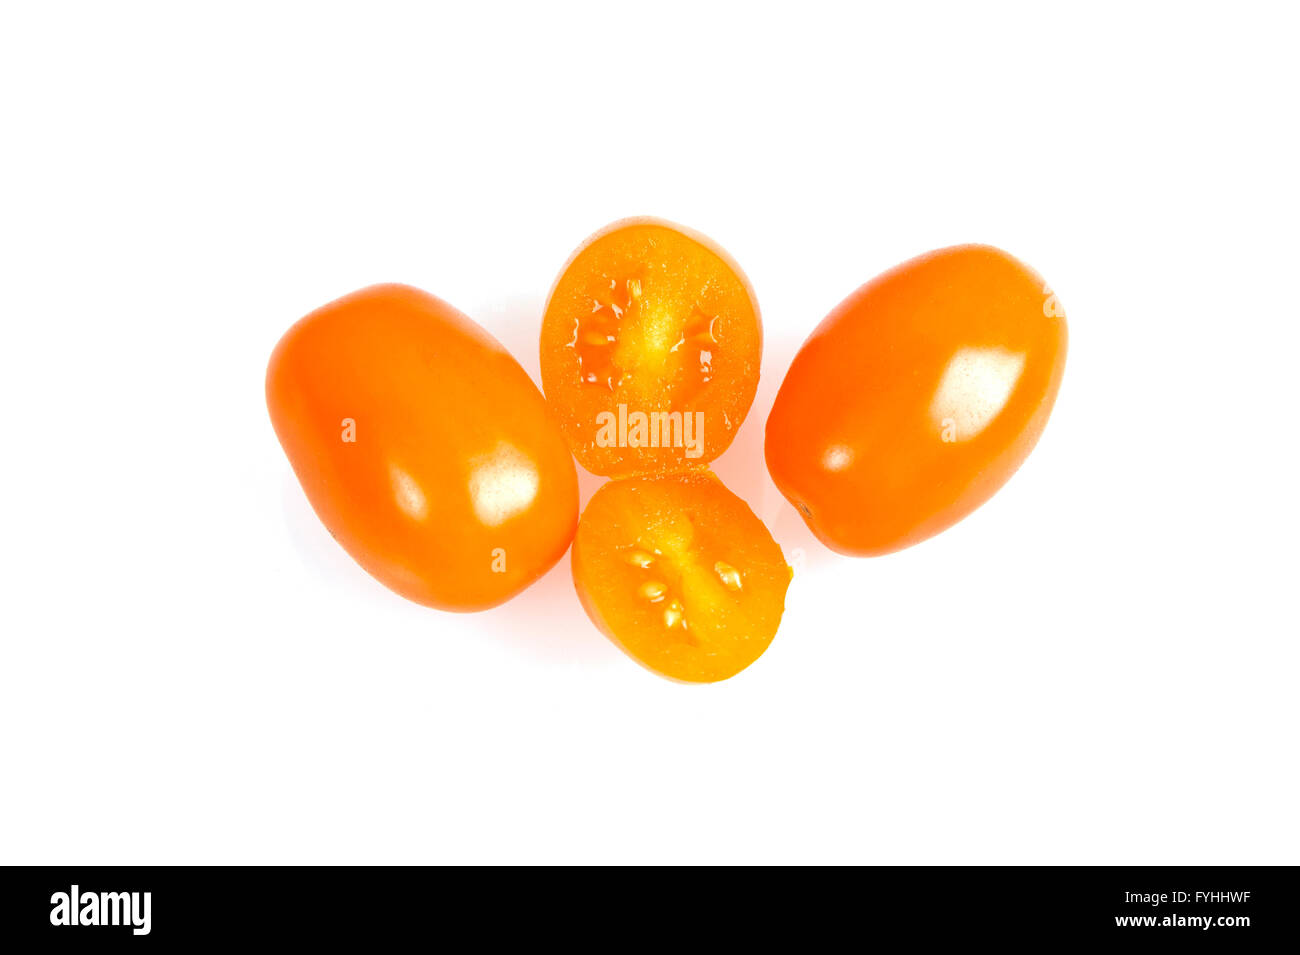 Perino tomatoes Cut Out Stock Images & Pictures - Alamy